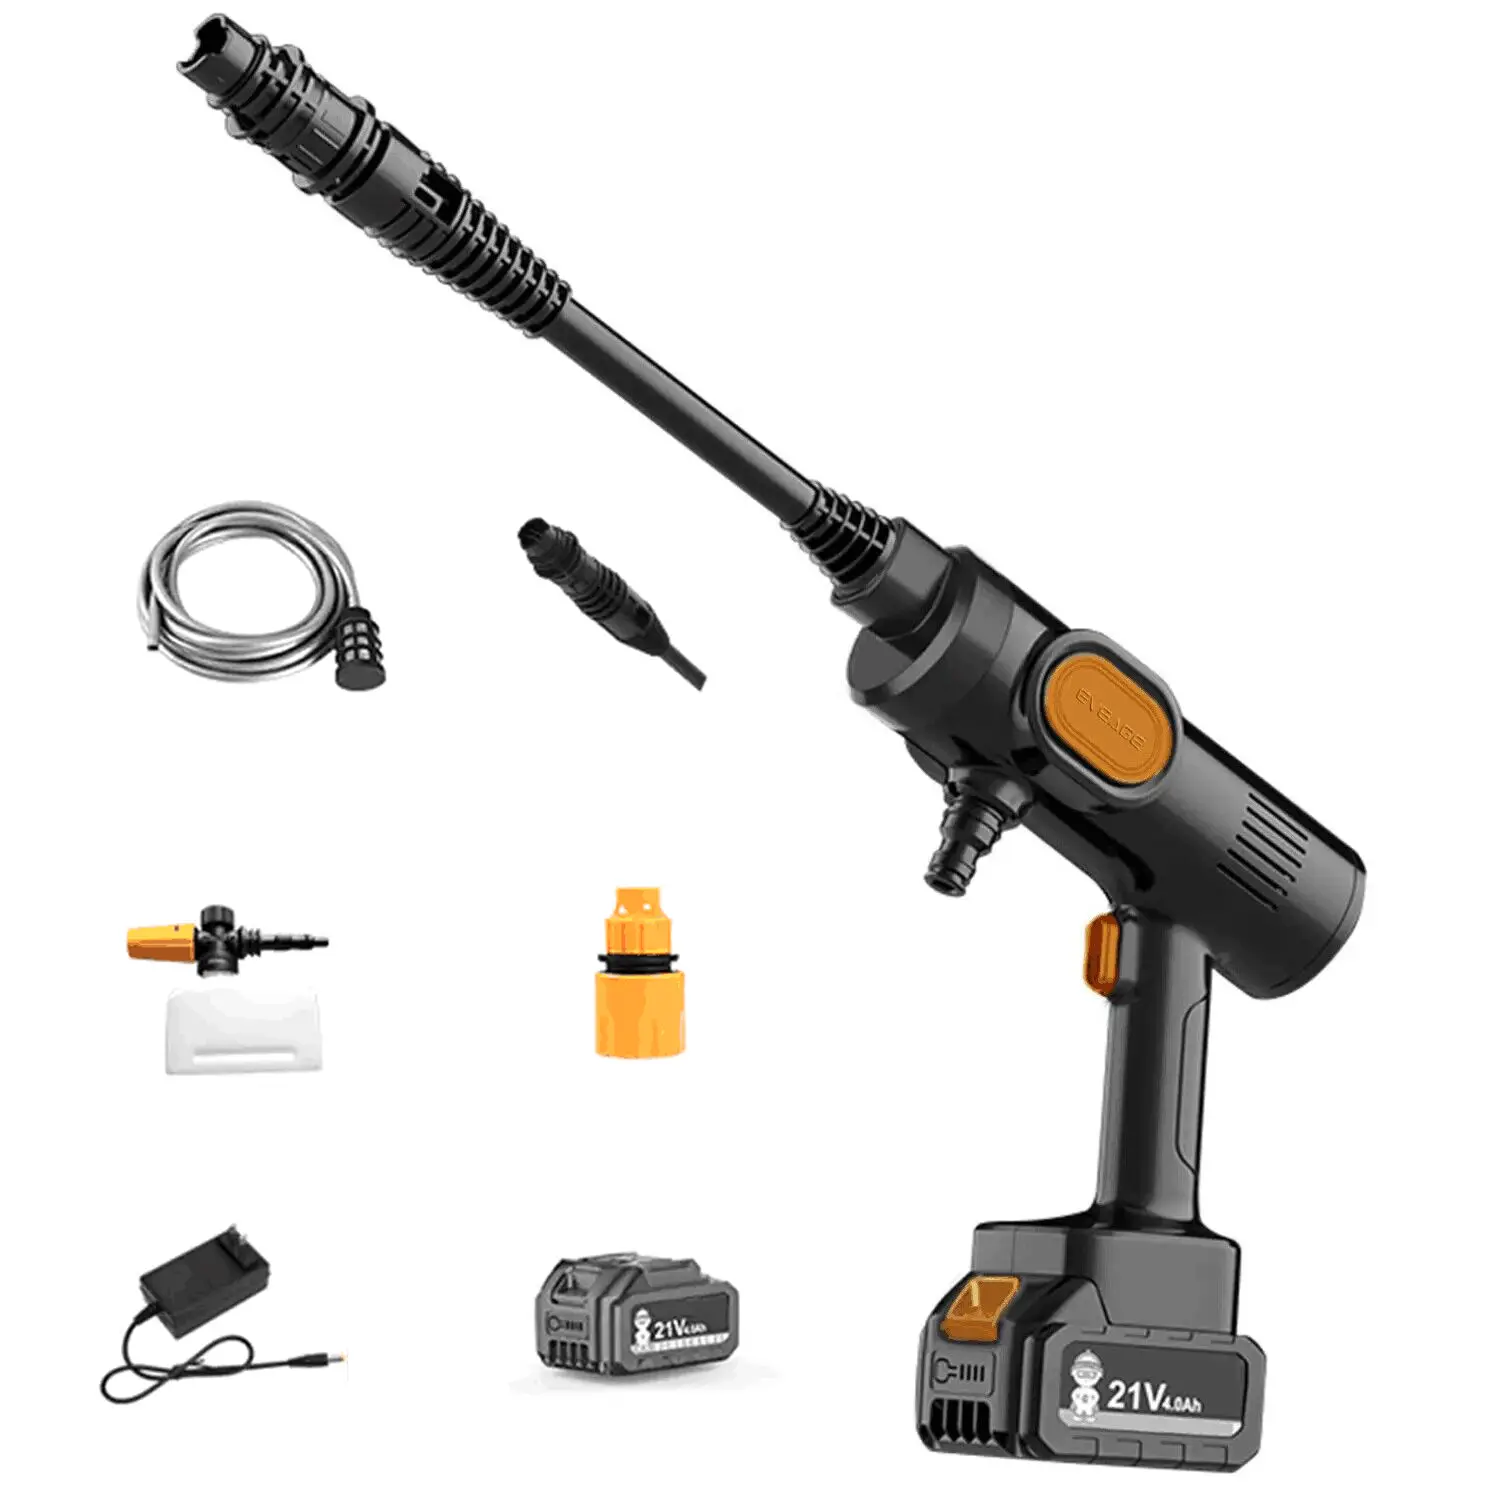 EVEAGE Cordless Power Washer, 652PSI Cordless Pressure Washer with Rechargeable 4.0Ah Battery